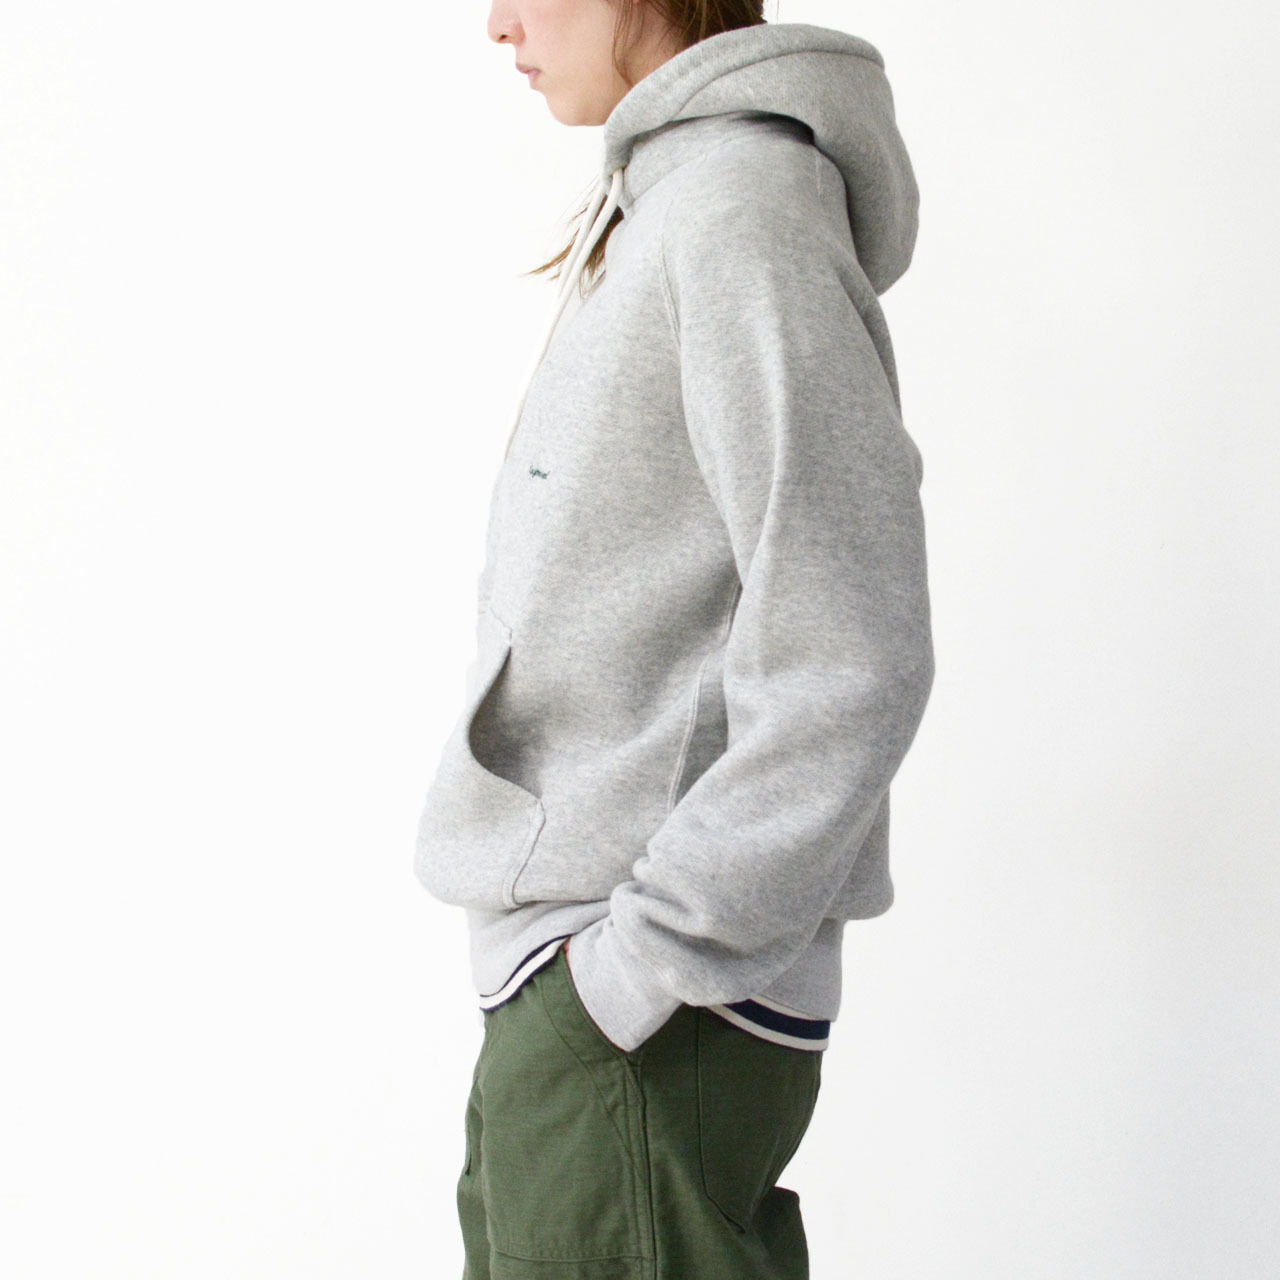 Gymphlex [ジムフレックス] SWING SLEEVE PULLOVER HOODIE [GY-C0002 ARB]_f0051306_13475984.jpg